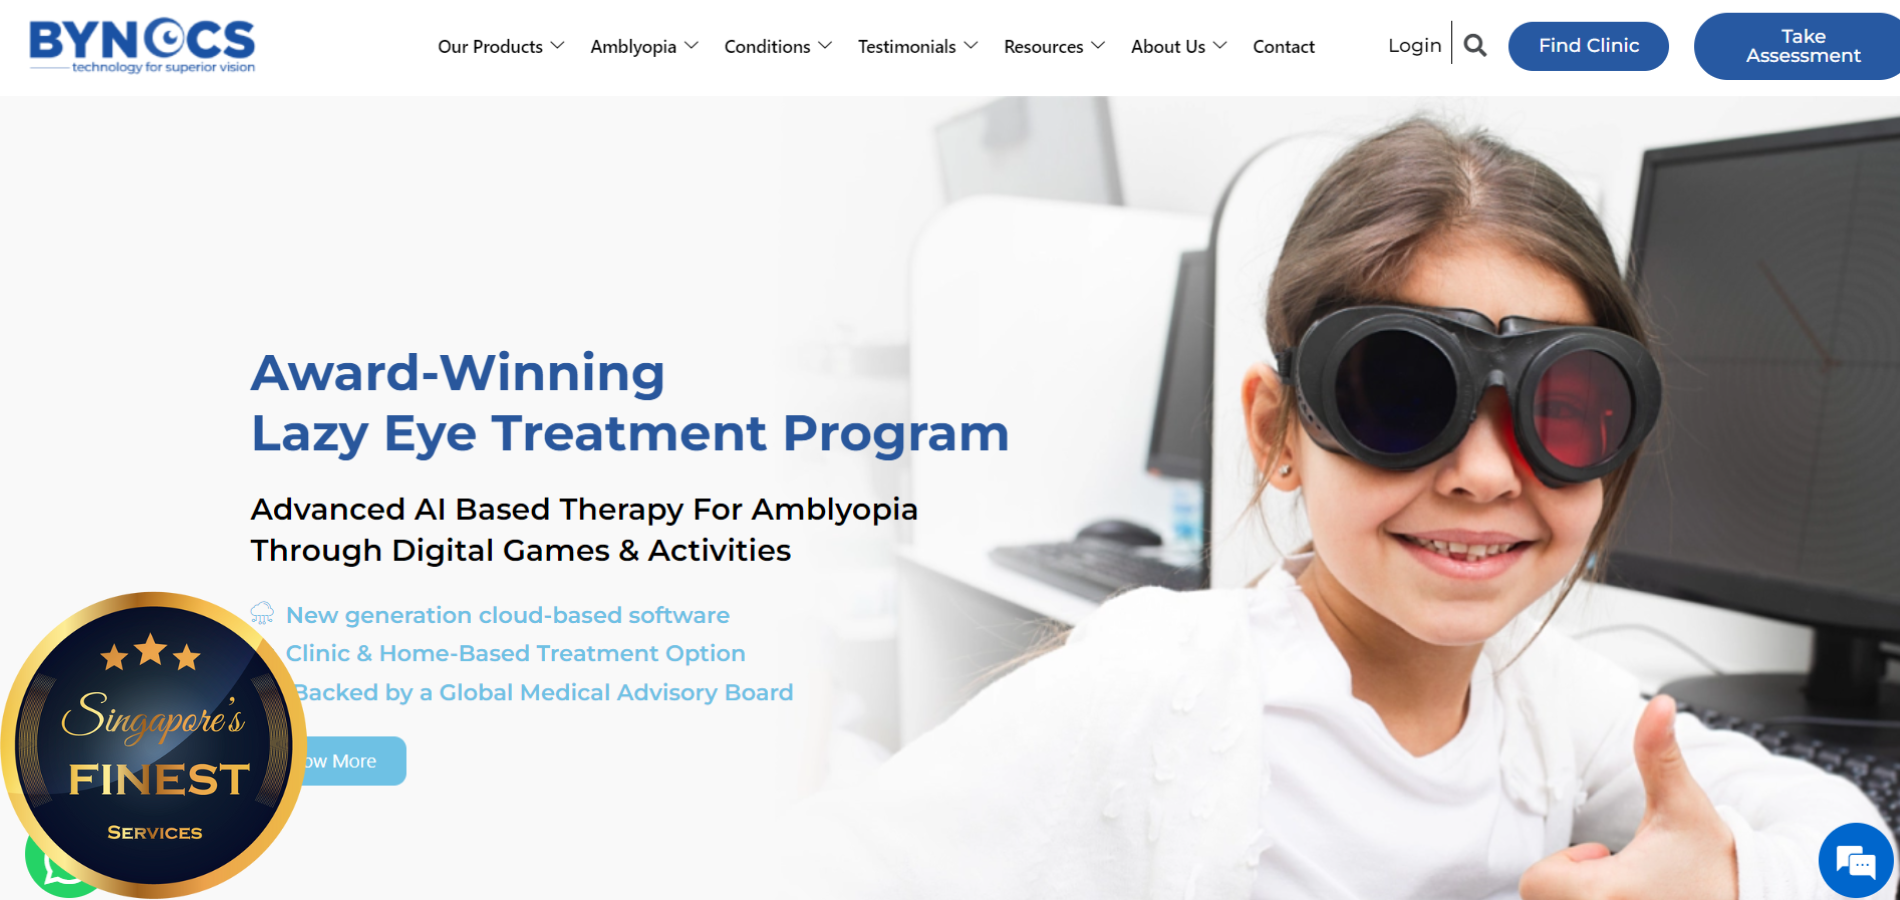 The Finest Vision Therapy Services in Singapore